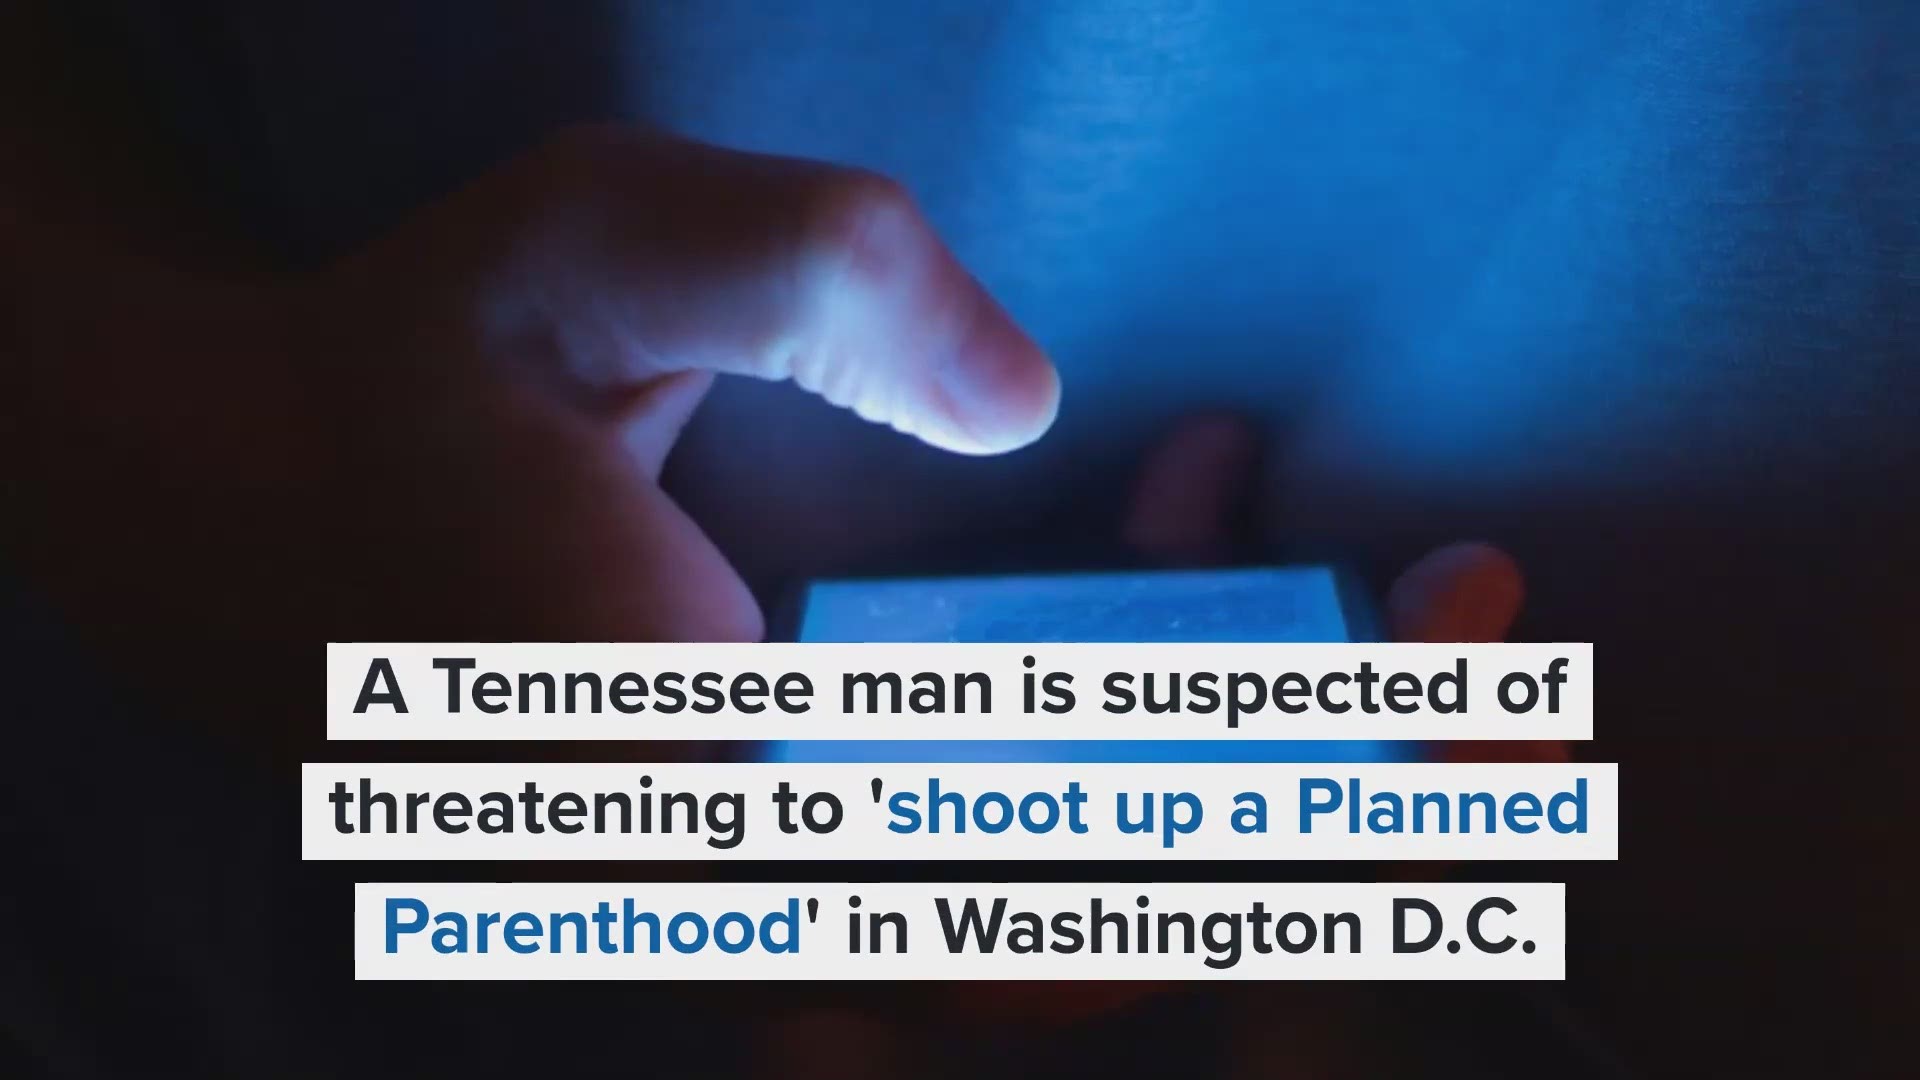 Jacob Cooper, 20, is facing federal charges for allegedly threatening a Planned Parenthood in DC and to kill federal agents who contact him.